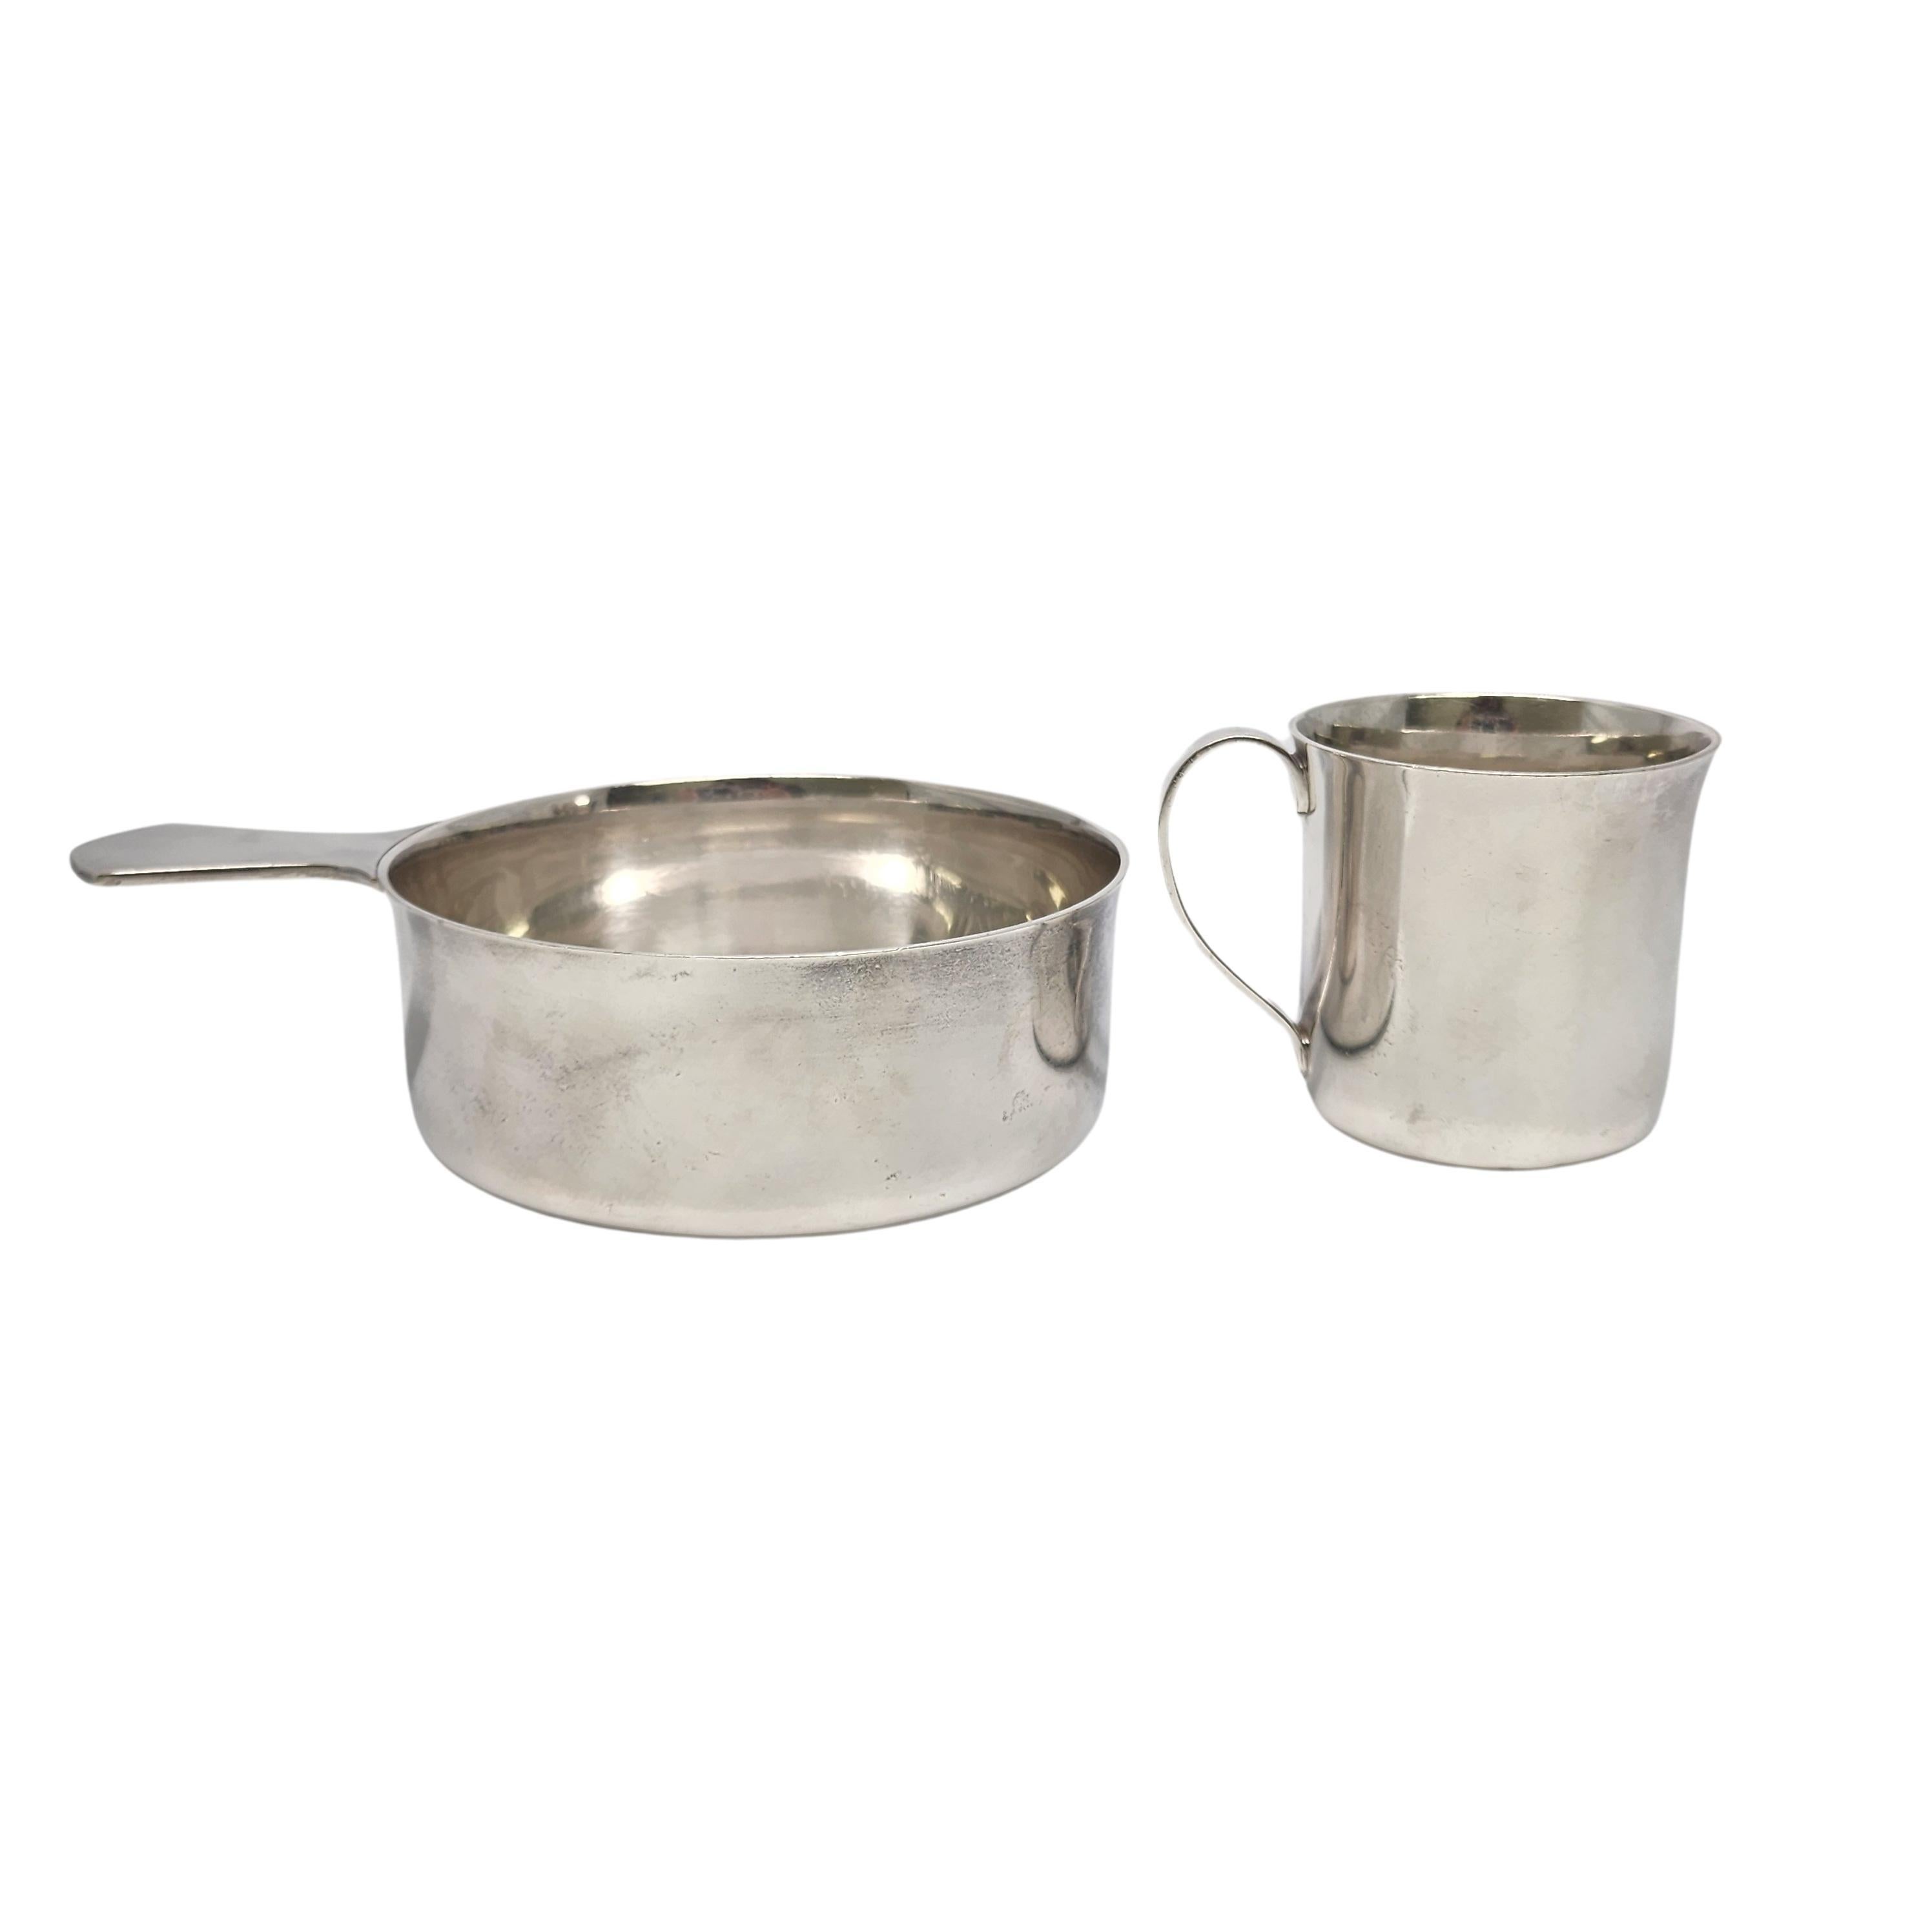 Vintage Tiffany & Co sterling silver baby cup and porringer bowl.

No monogram

A simple and classic polished design on both pieces make for a timeless and classic baby set. Hallmarks date this piece to manufacture under the directorship of Louis